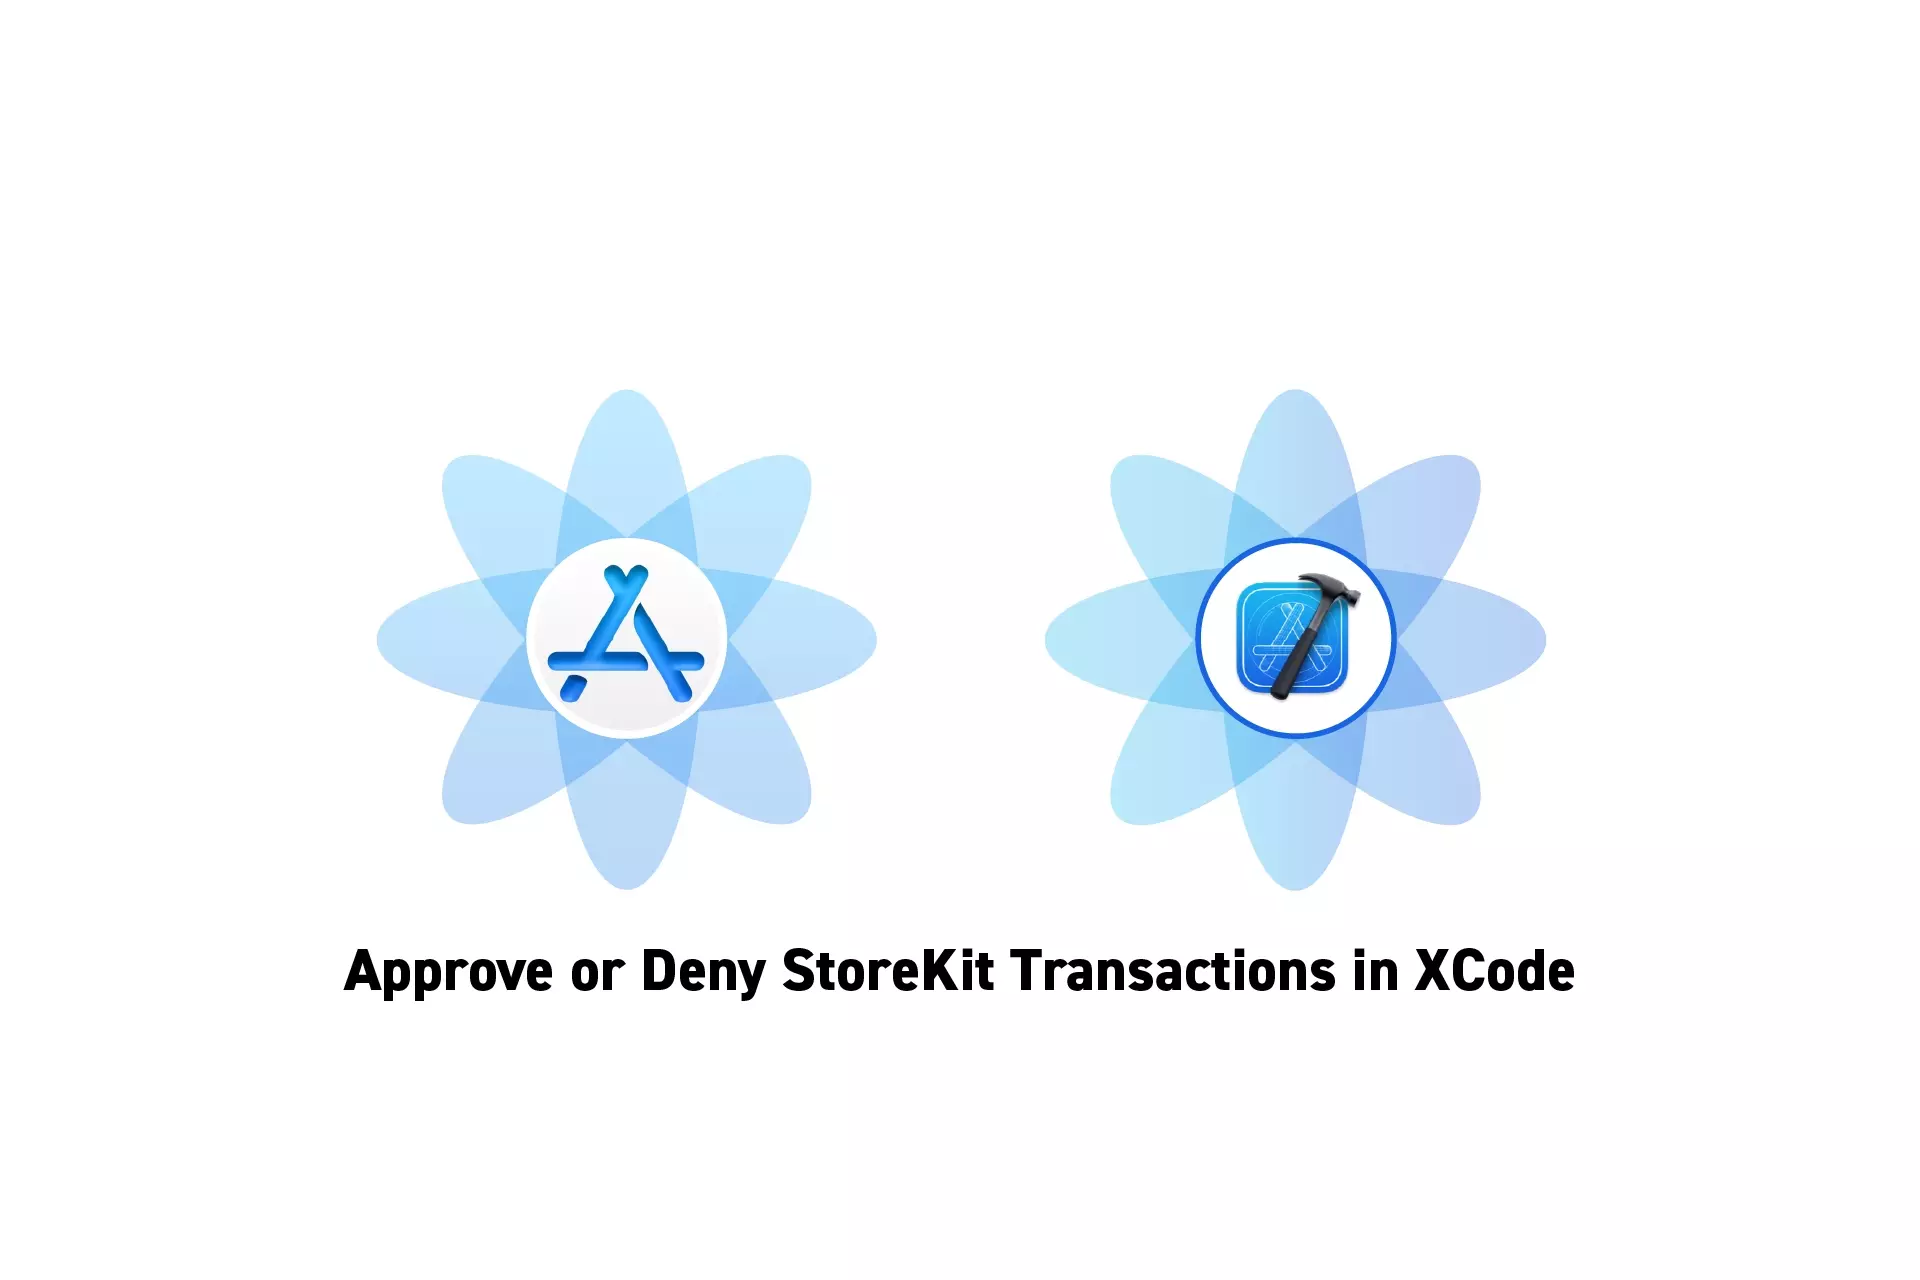 Two flowers that represent StoreKit and XCode side by side. Beneath them sits the text “Approve or Deny StoreKit Transactions in XCode.”